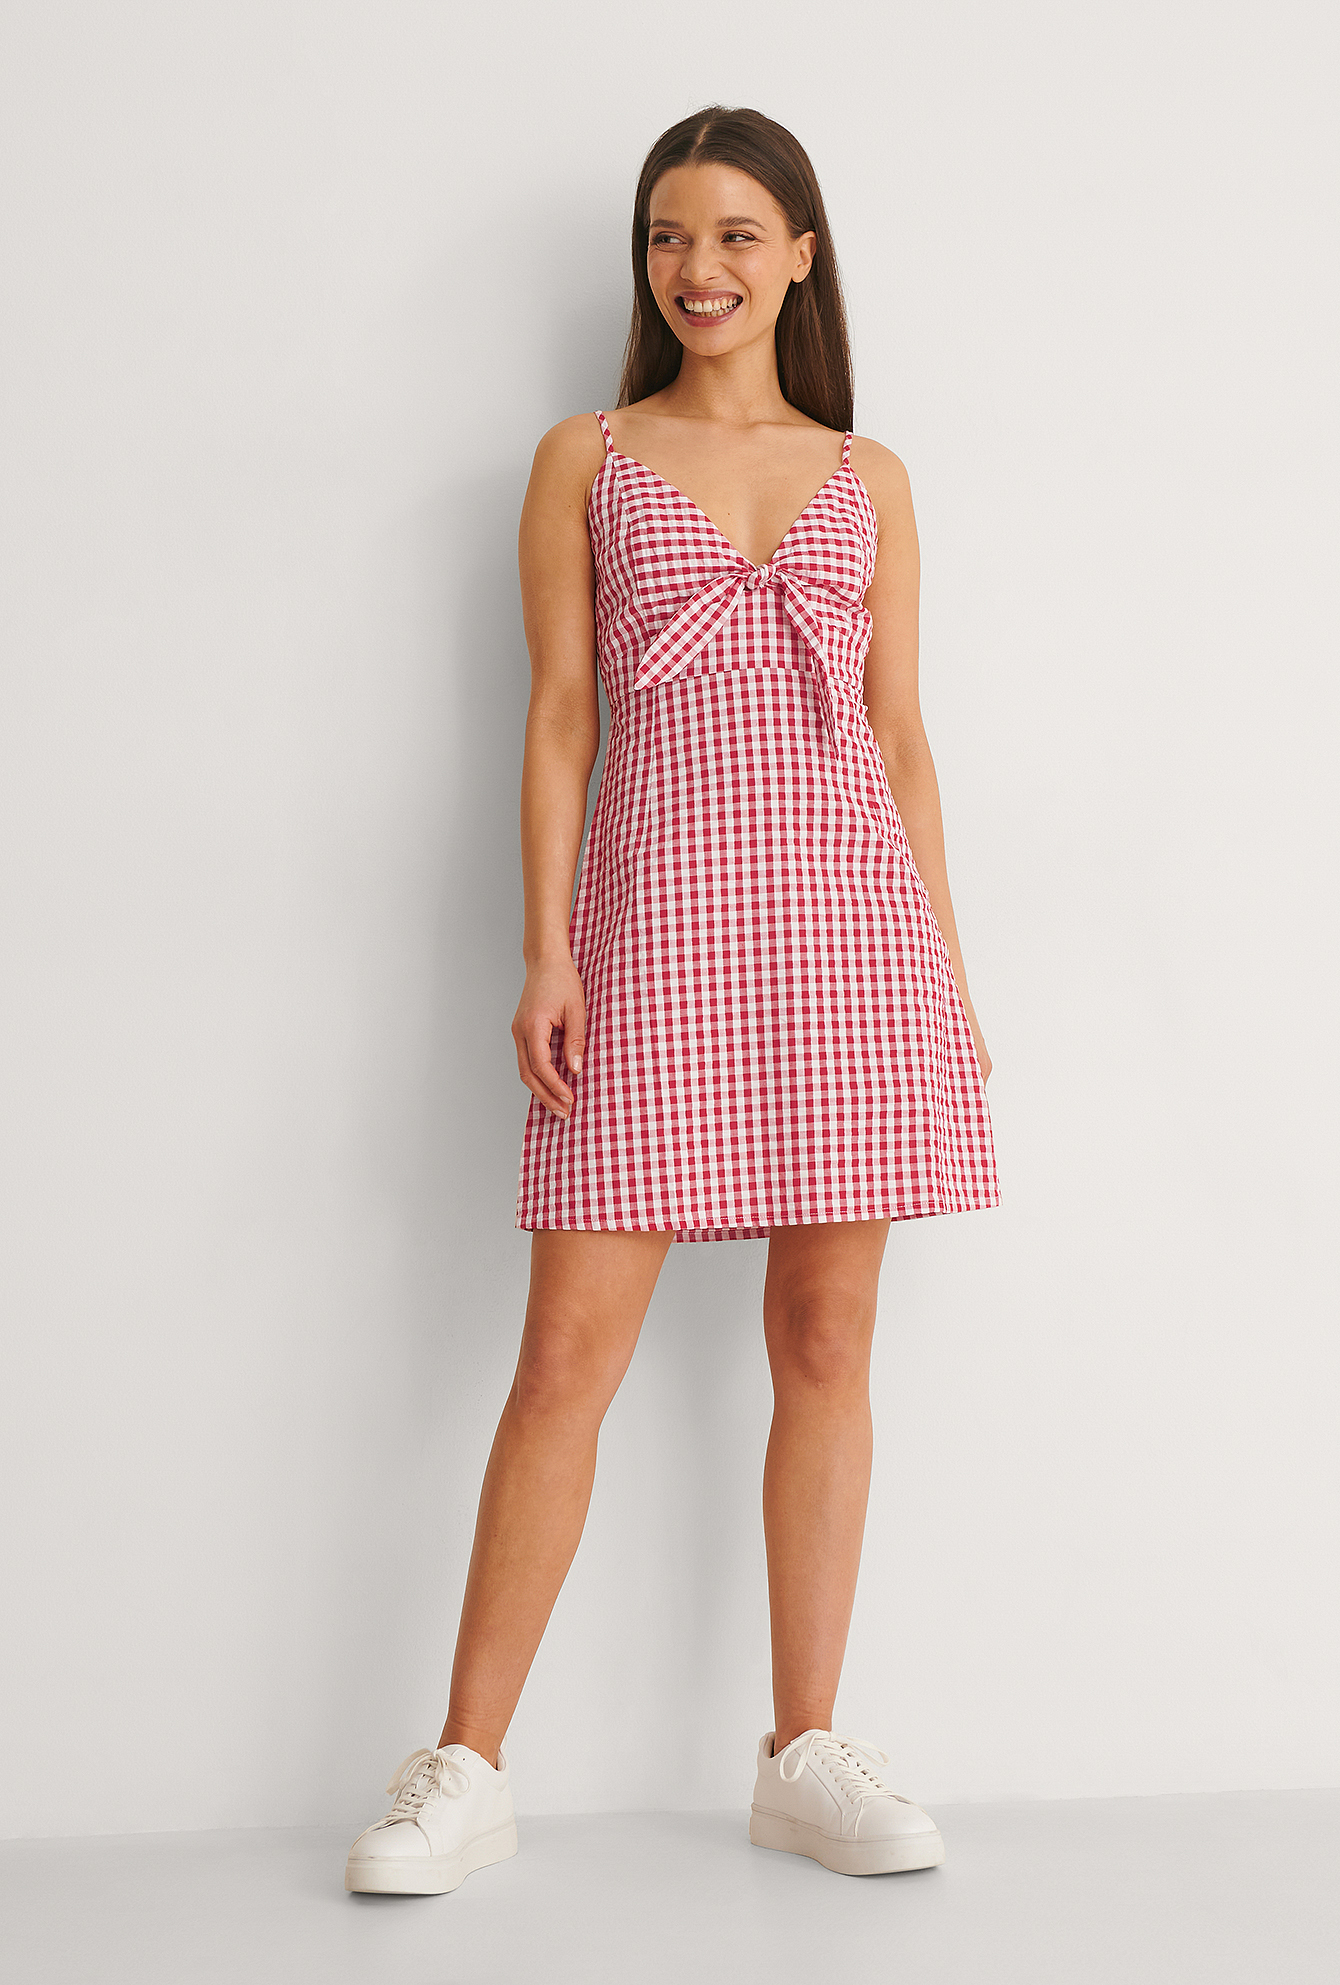 Gingham Mini Dress Outfit.